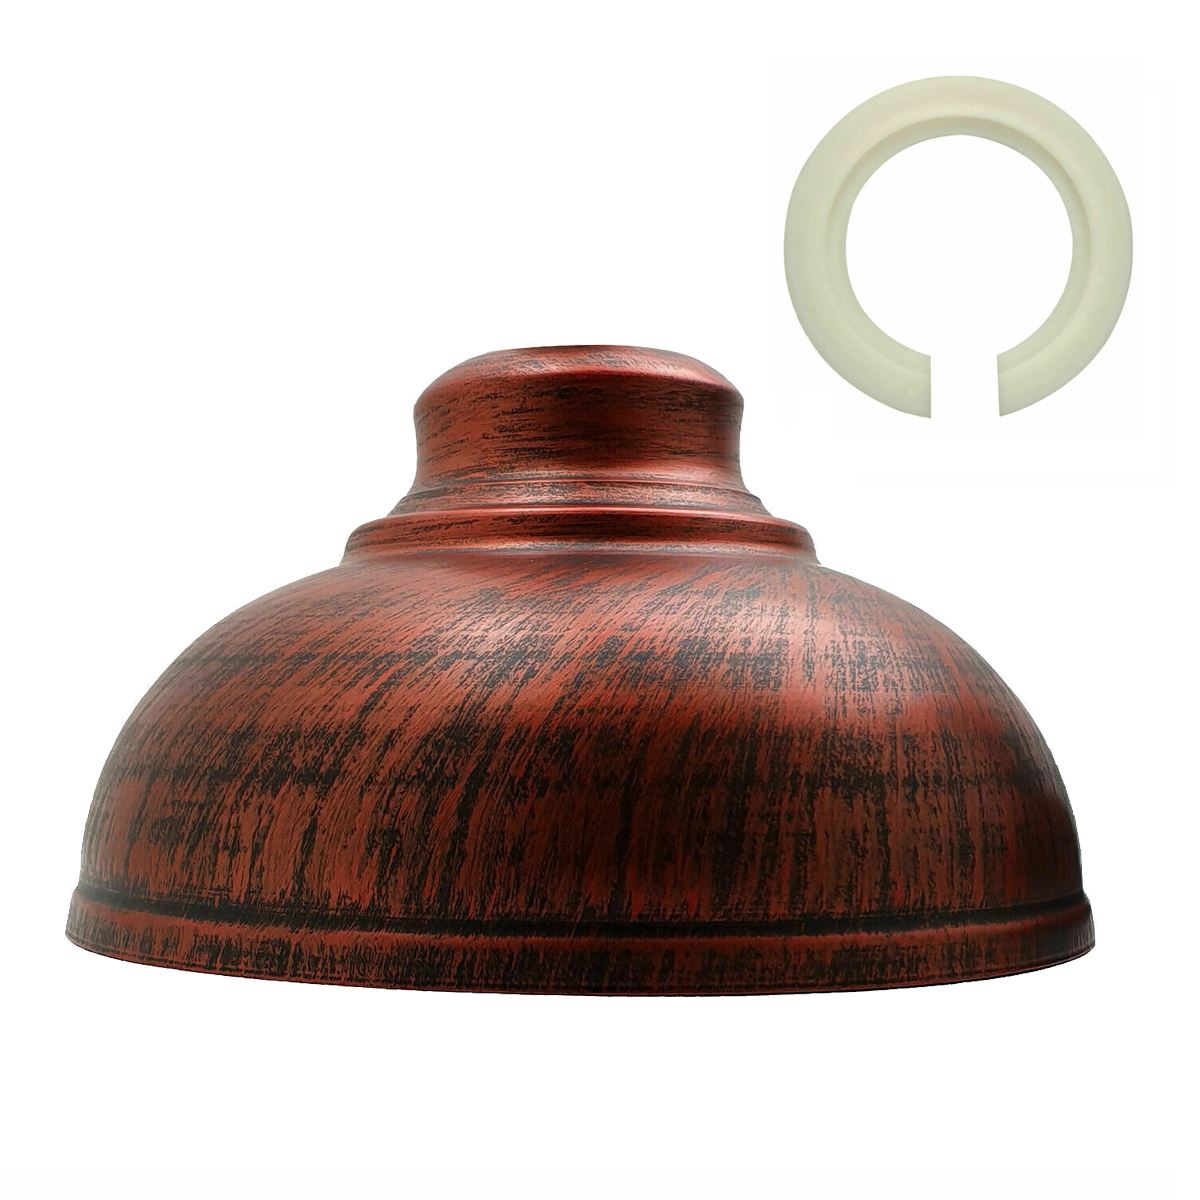 Light shade with reducer plate